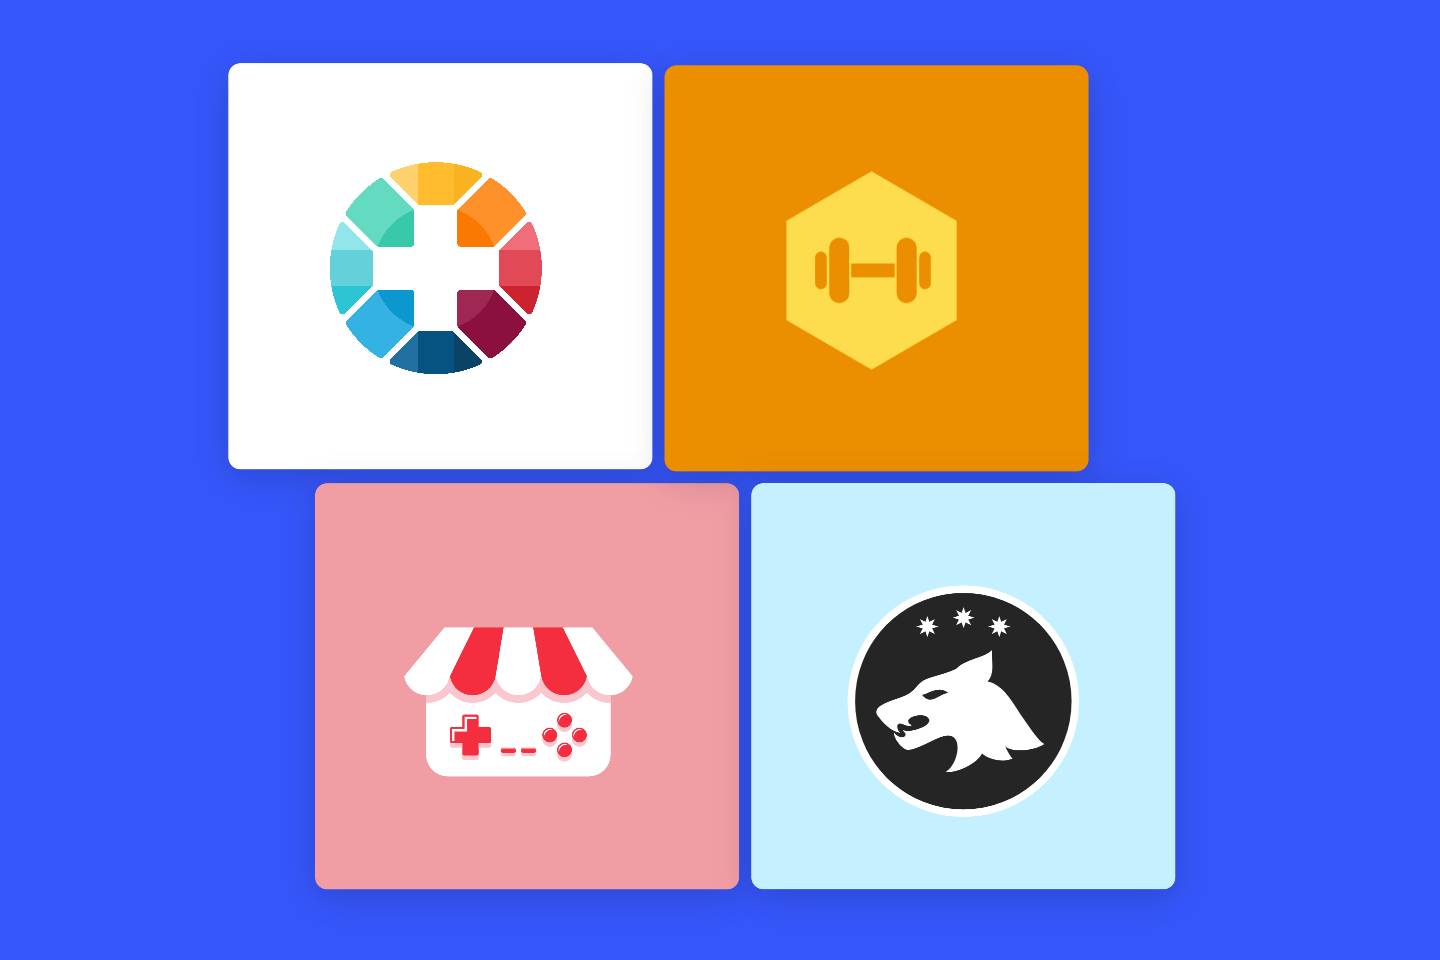 Favicons in different color backgrounds